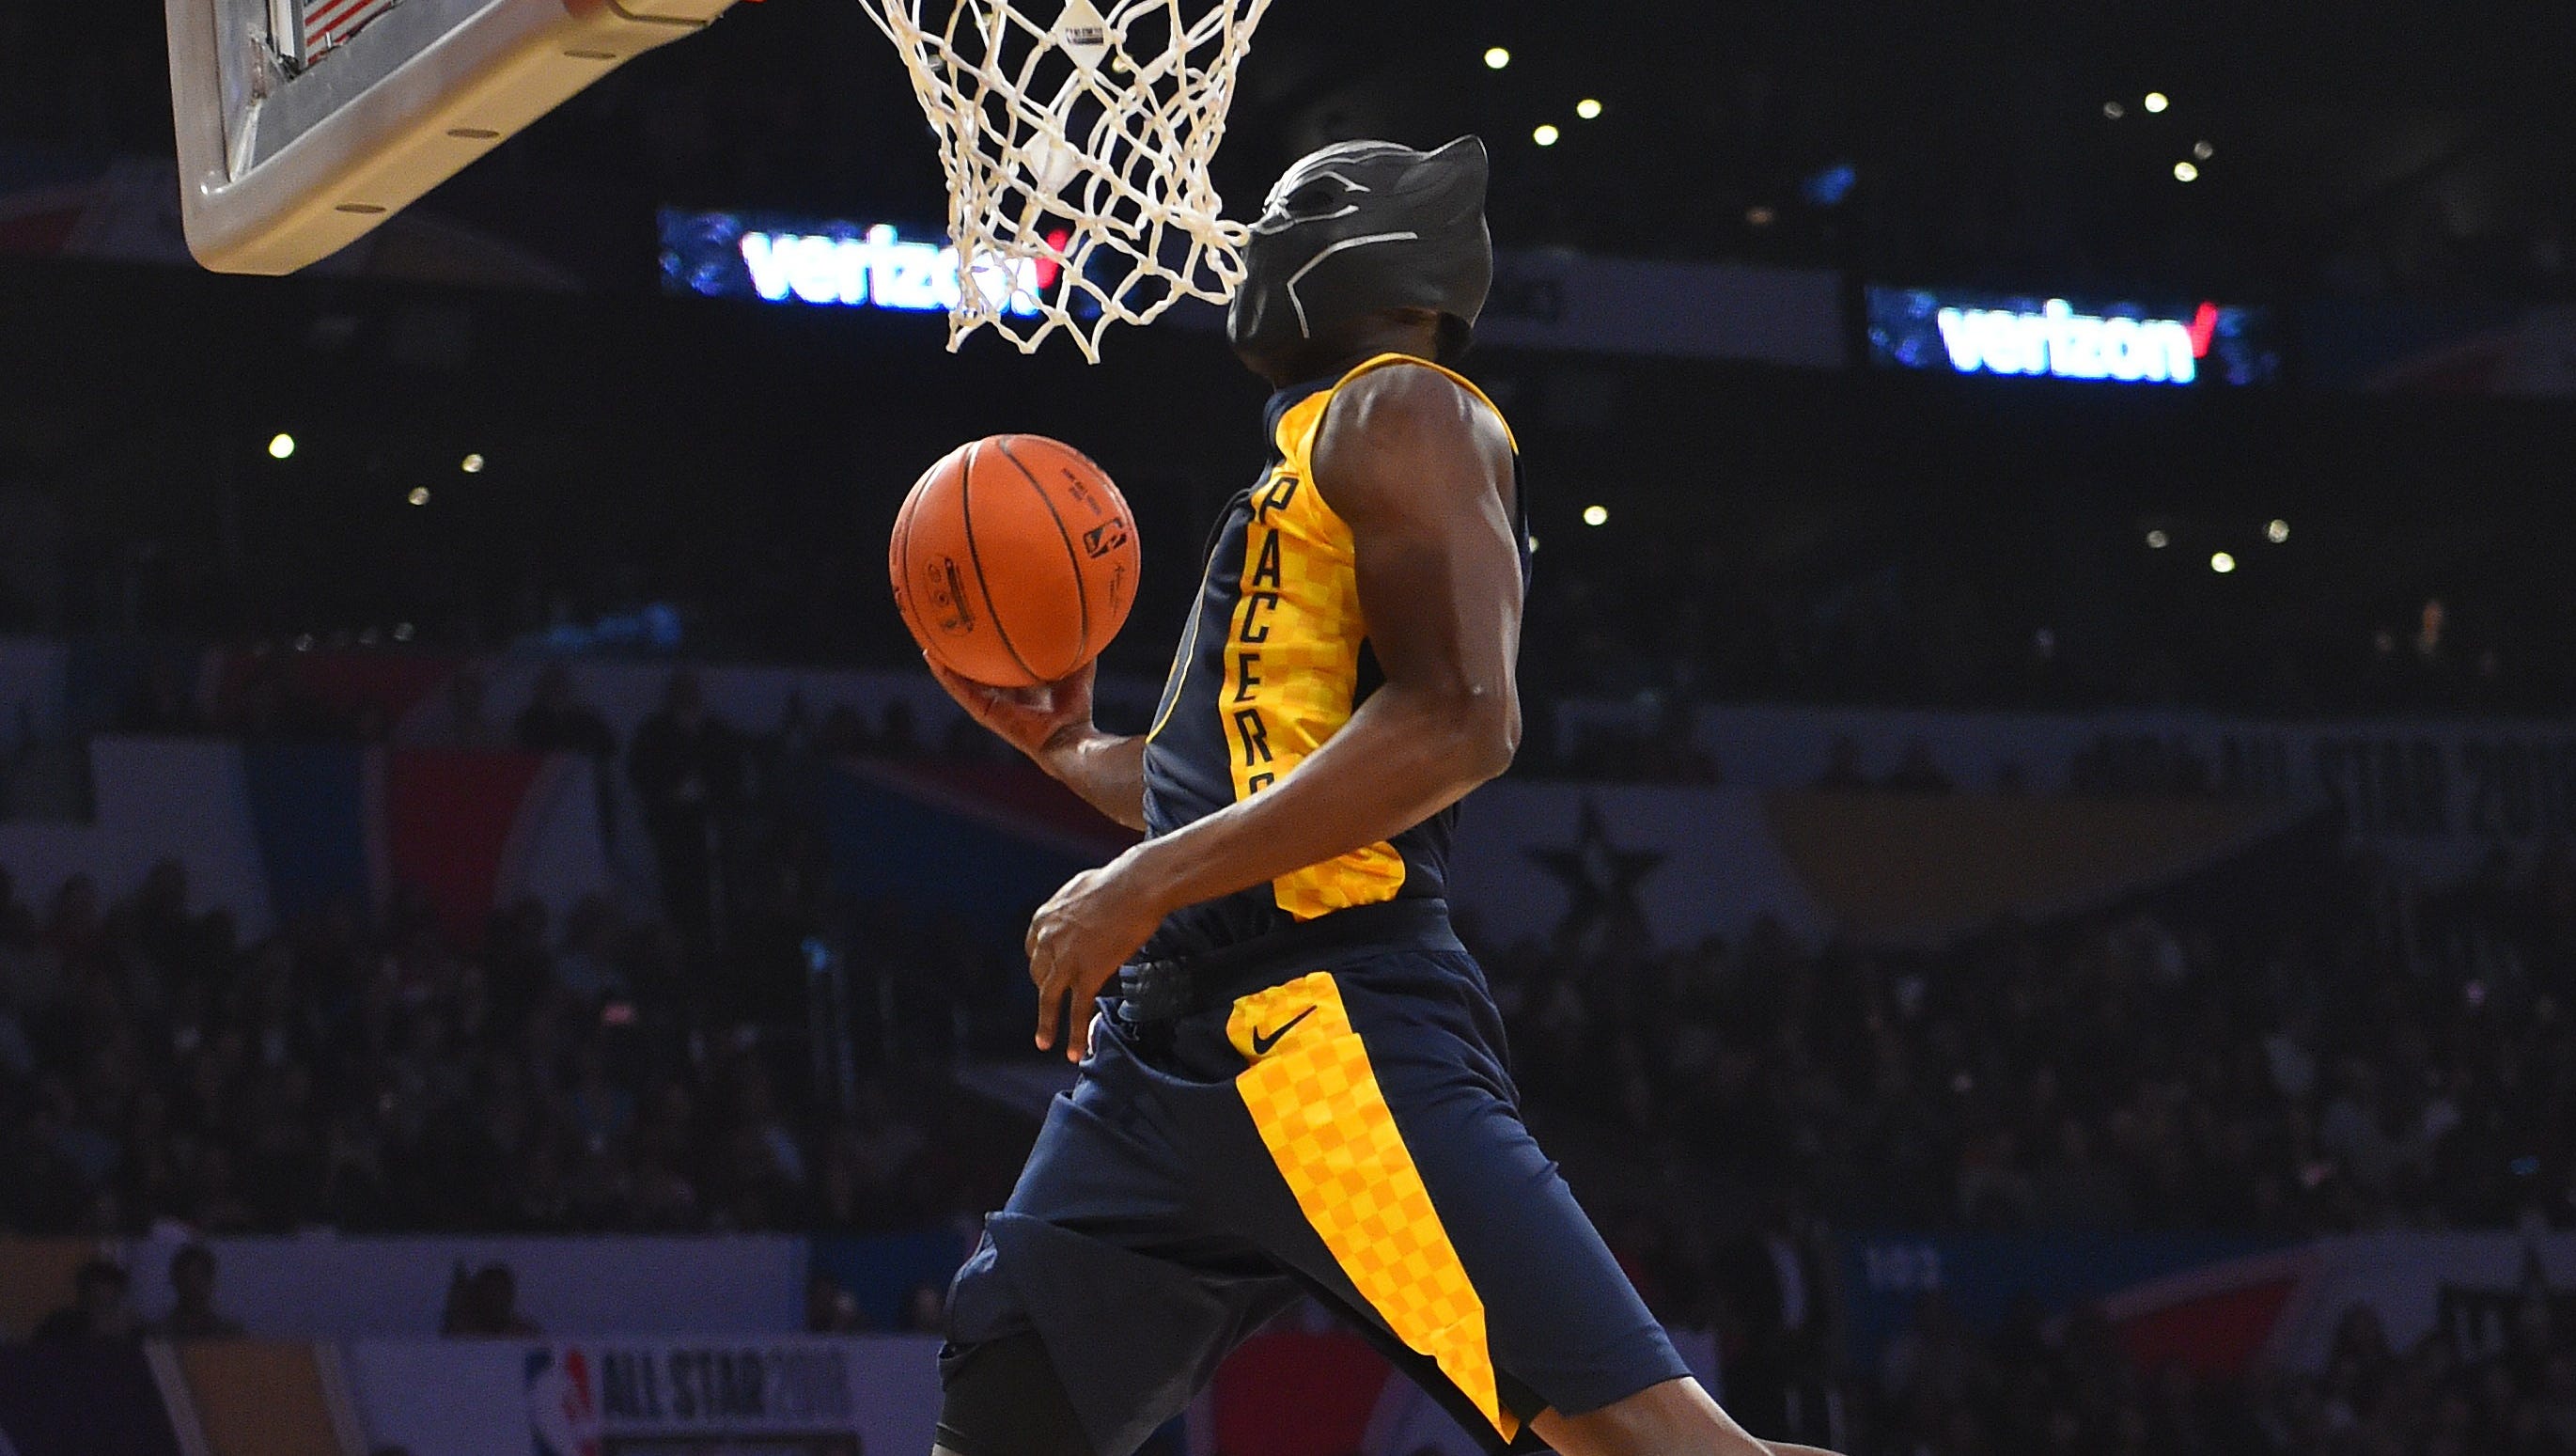 Pacers star Victor Oladipo pictured dunking while wearing a Black Panther superhero mask.